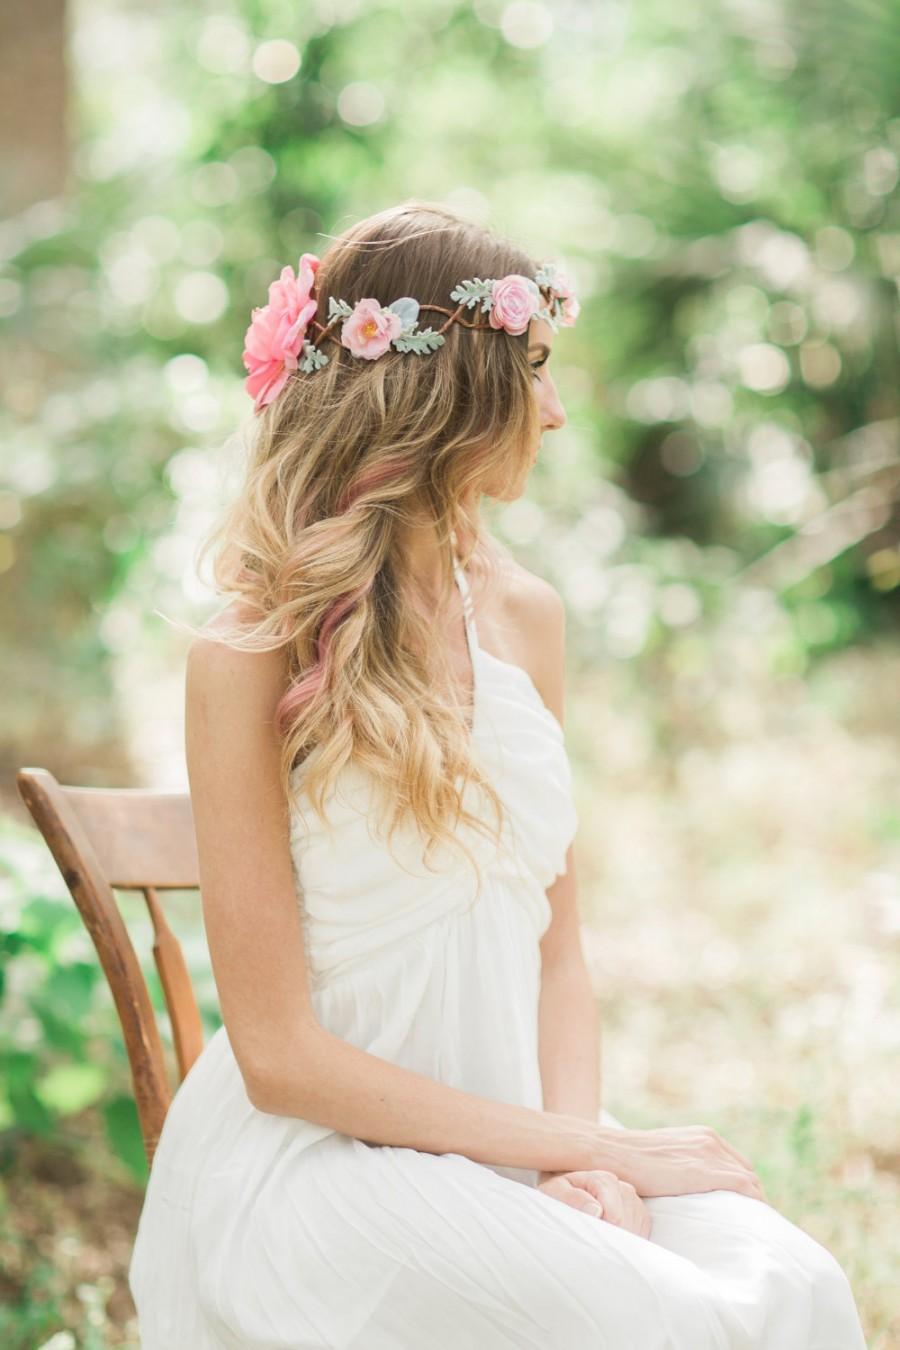 Wedding - The Nicala Flower Crown with wild roses, ranunculus, and dusty miller